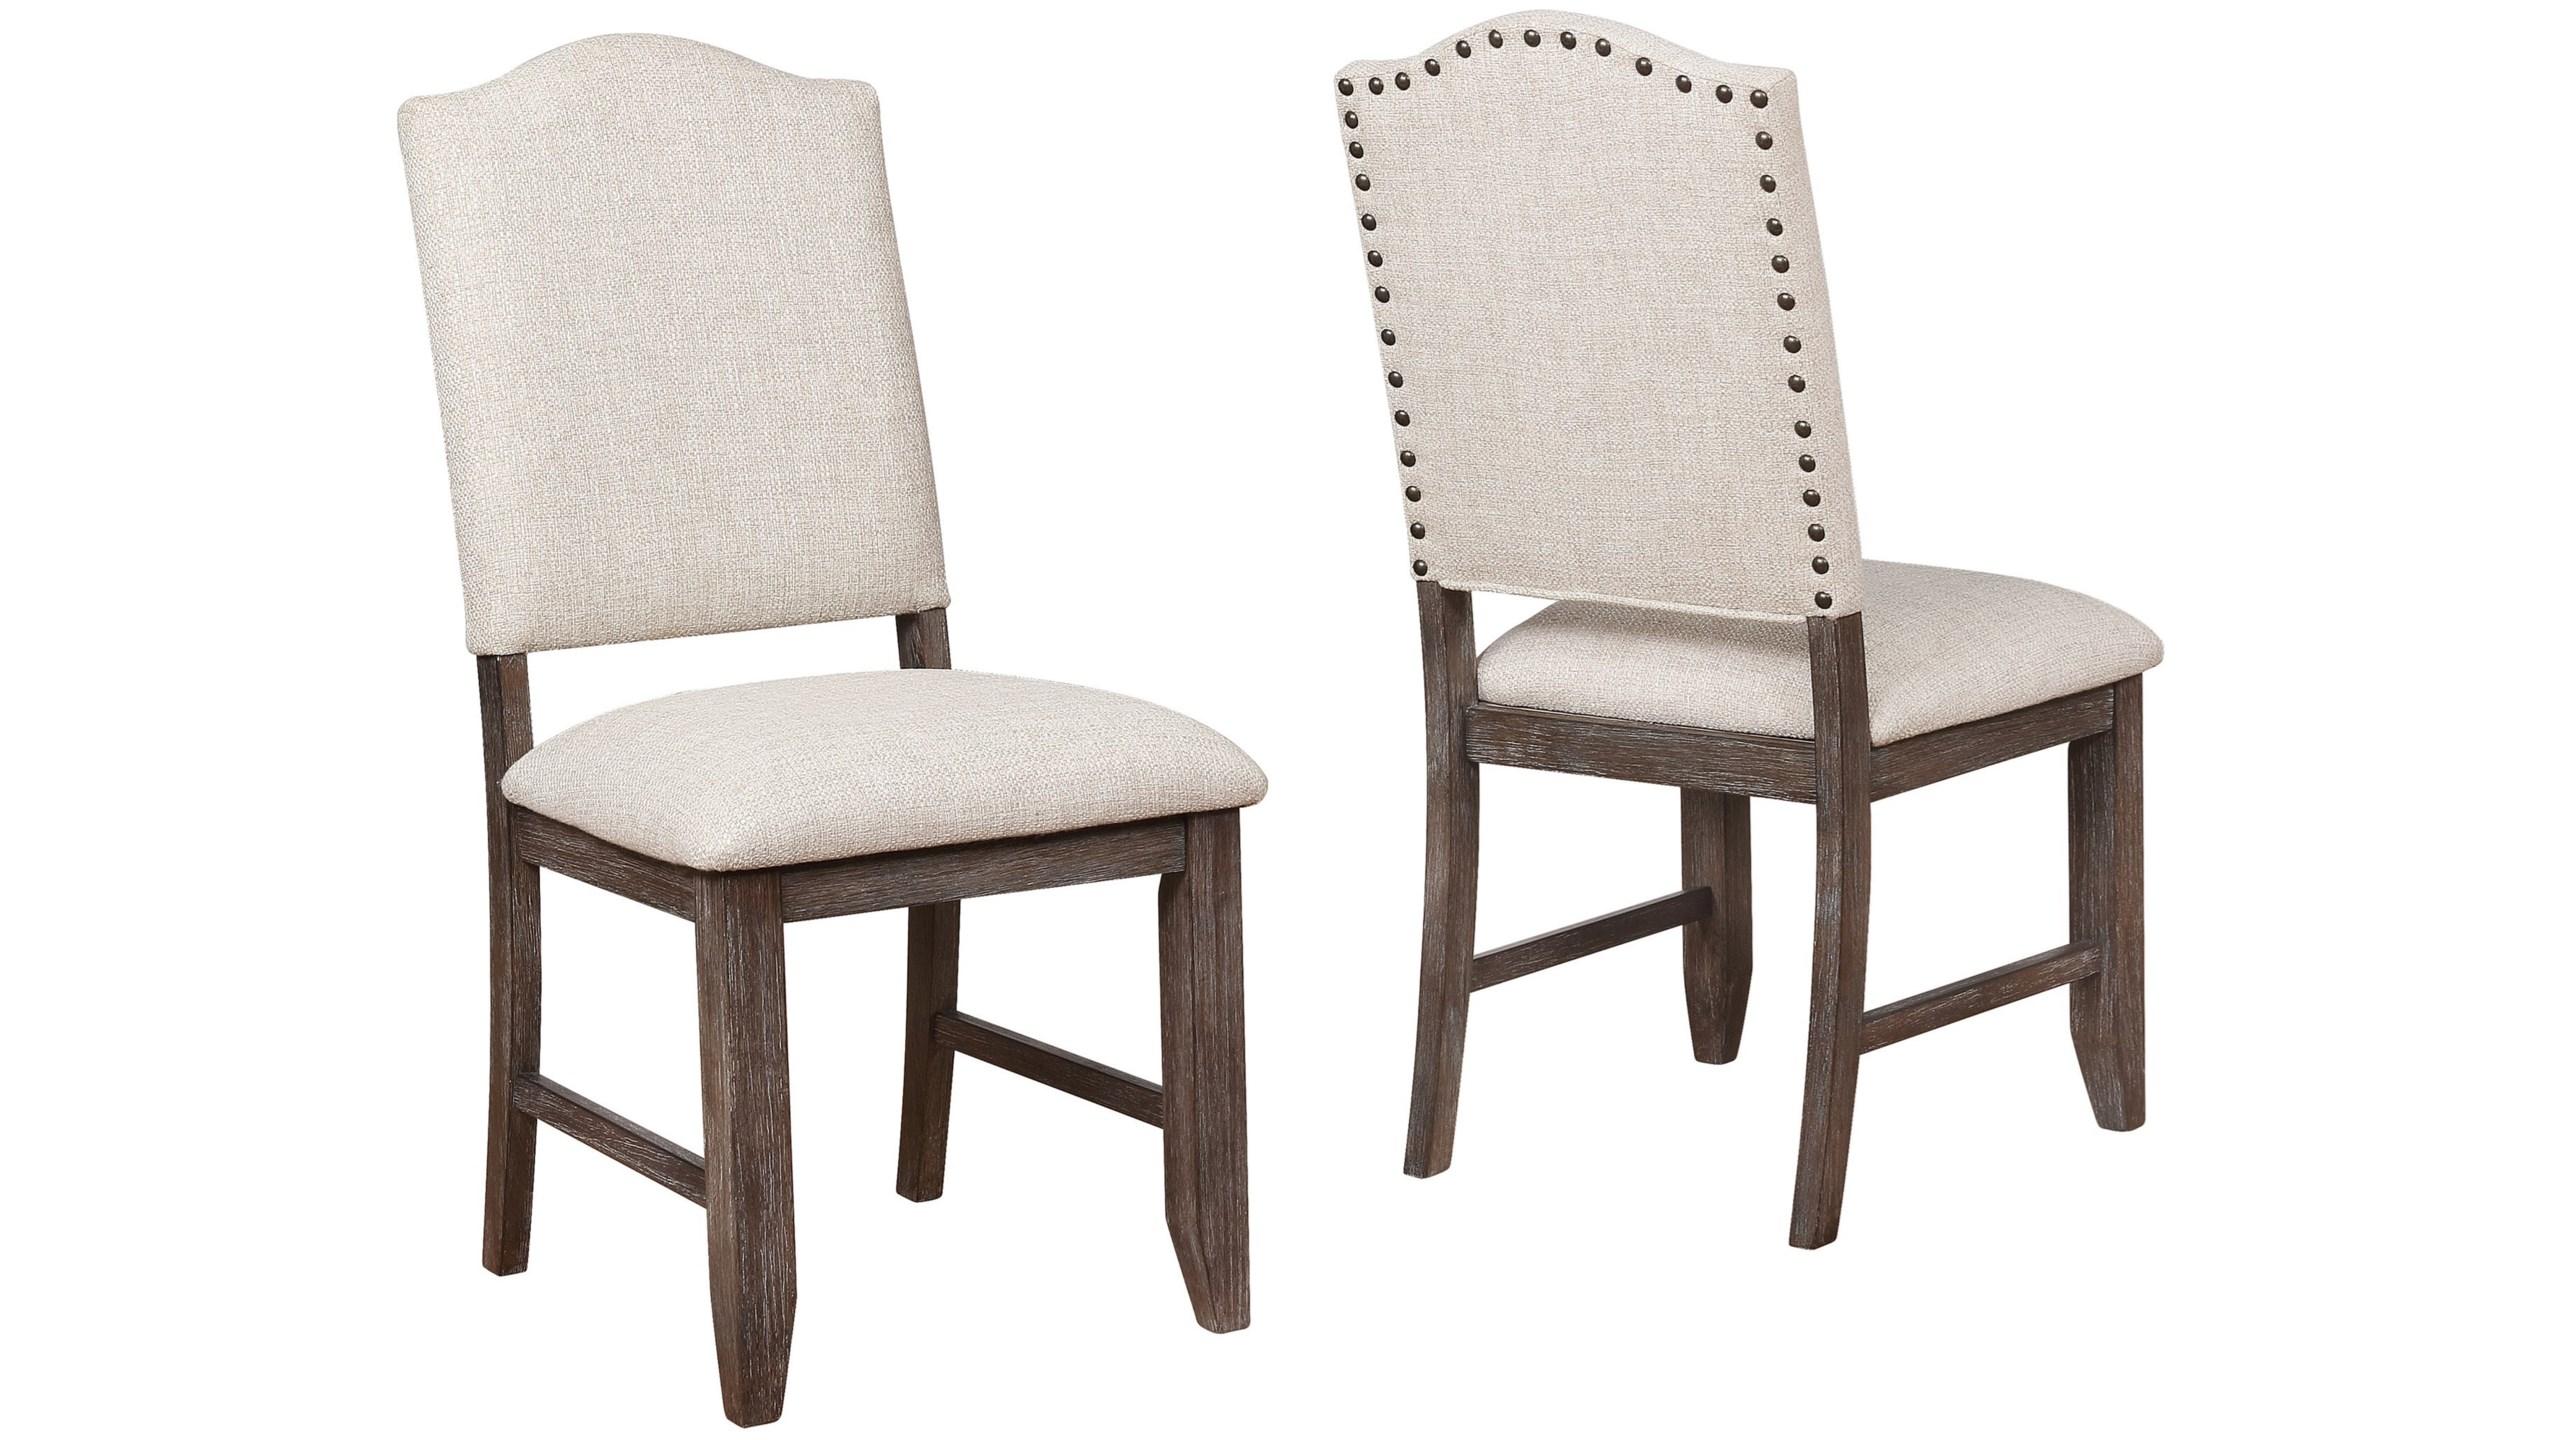 Traditional, Cottage Dining Chair Set Regent 2270S-2pcs in Cream, Brown Linen